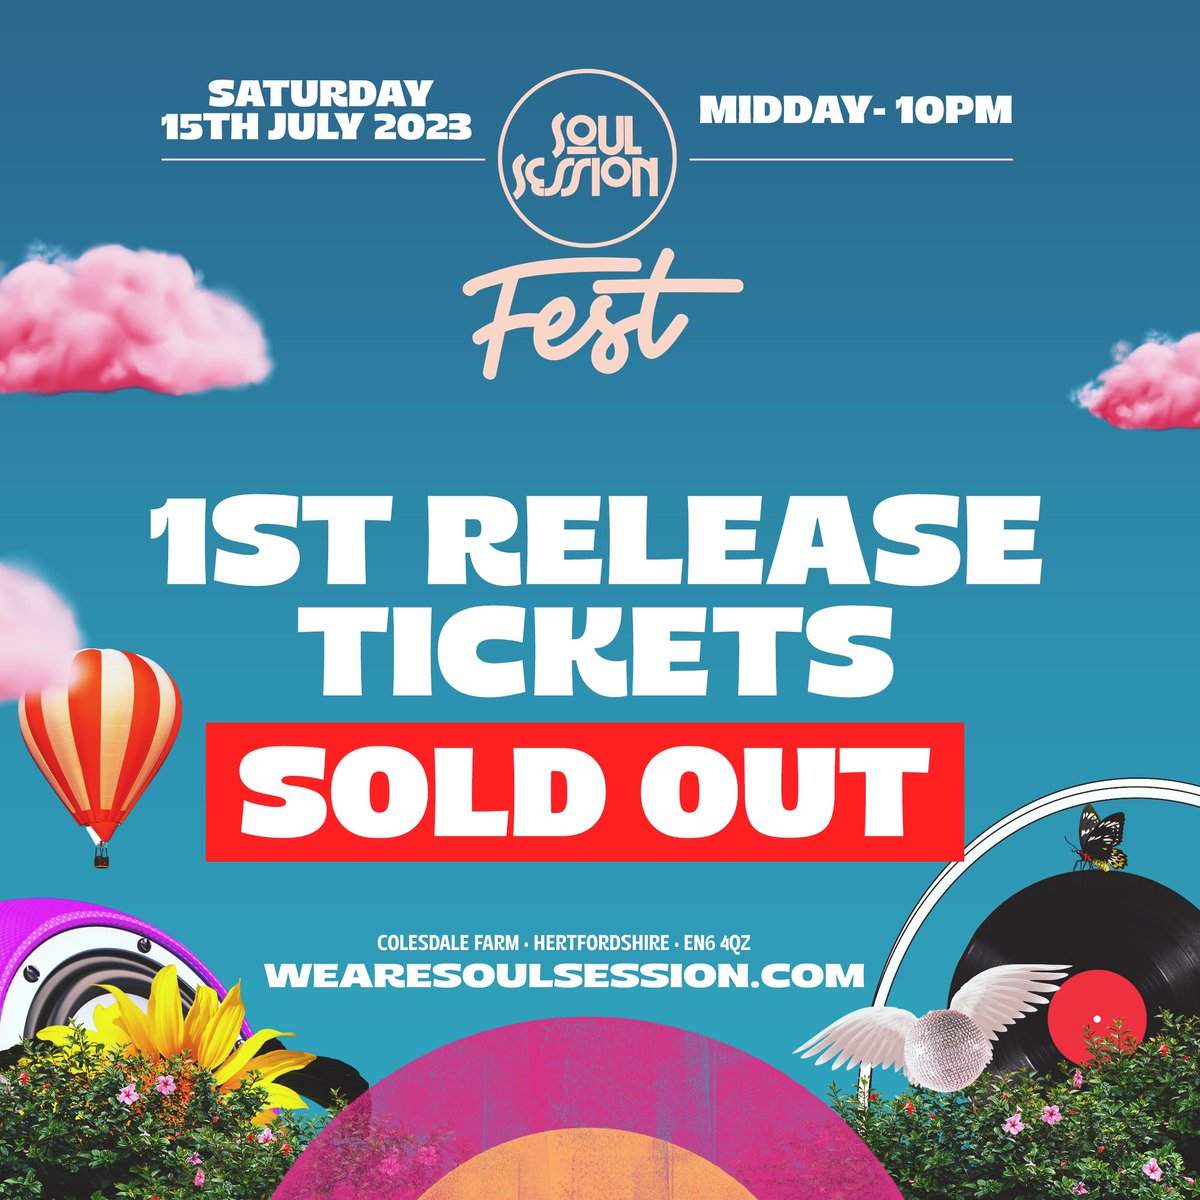 2nd Release Tickets ON SALE NOW! 🔥🫶🎟️ Tickets & Info 🔗 In Bio 🥳 

Soul Session FEST ☀️🔥🎪 
Saturday 15th July
Colesdale Farm, Hertfordshire EN6

#SoulSessionFEST #wearesoulsession #soulsession #housemusic #housemusiclovers #ilovehousemusic